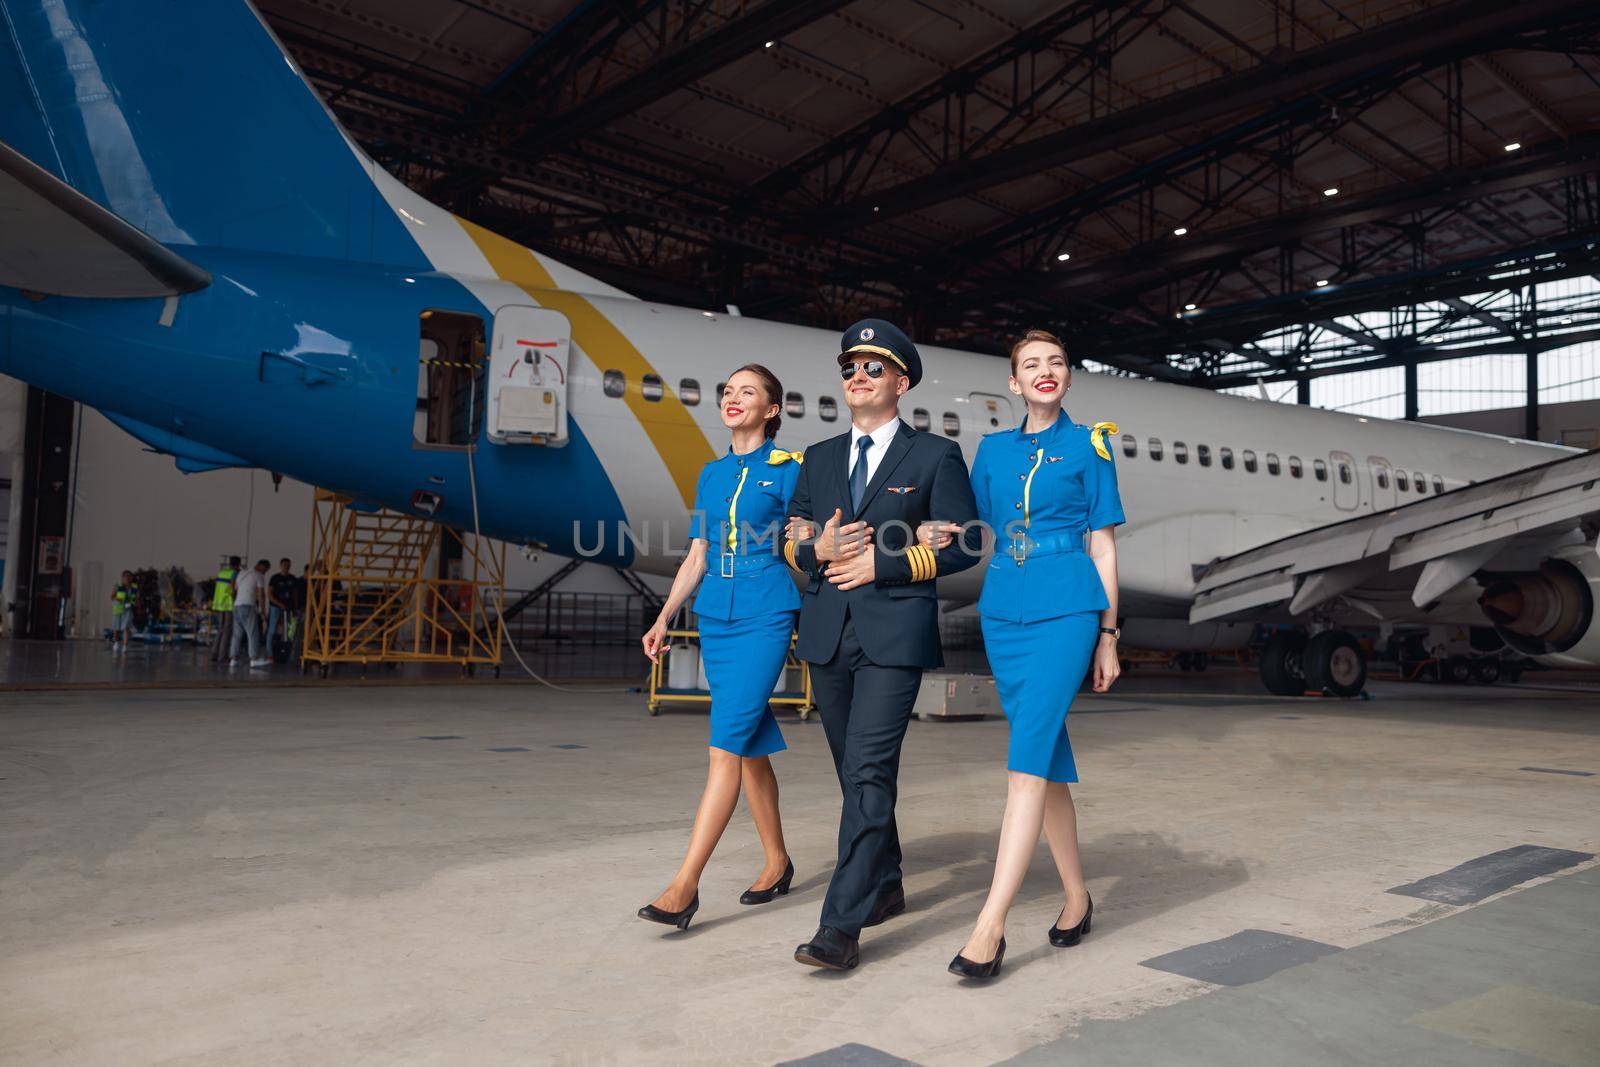 Full length shot of pilot in uniform and aviator sunglasses walking together with two air stewardesses in blue uniform in front of big passenger airplane in airport hangar. Aircraft, occupation